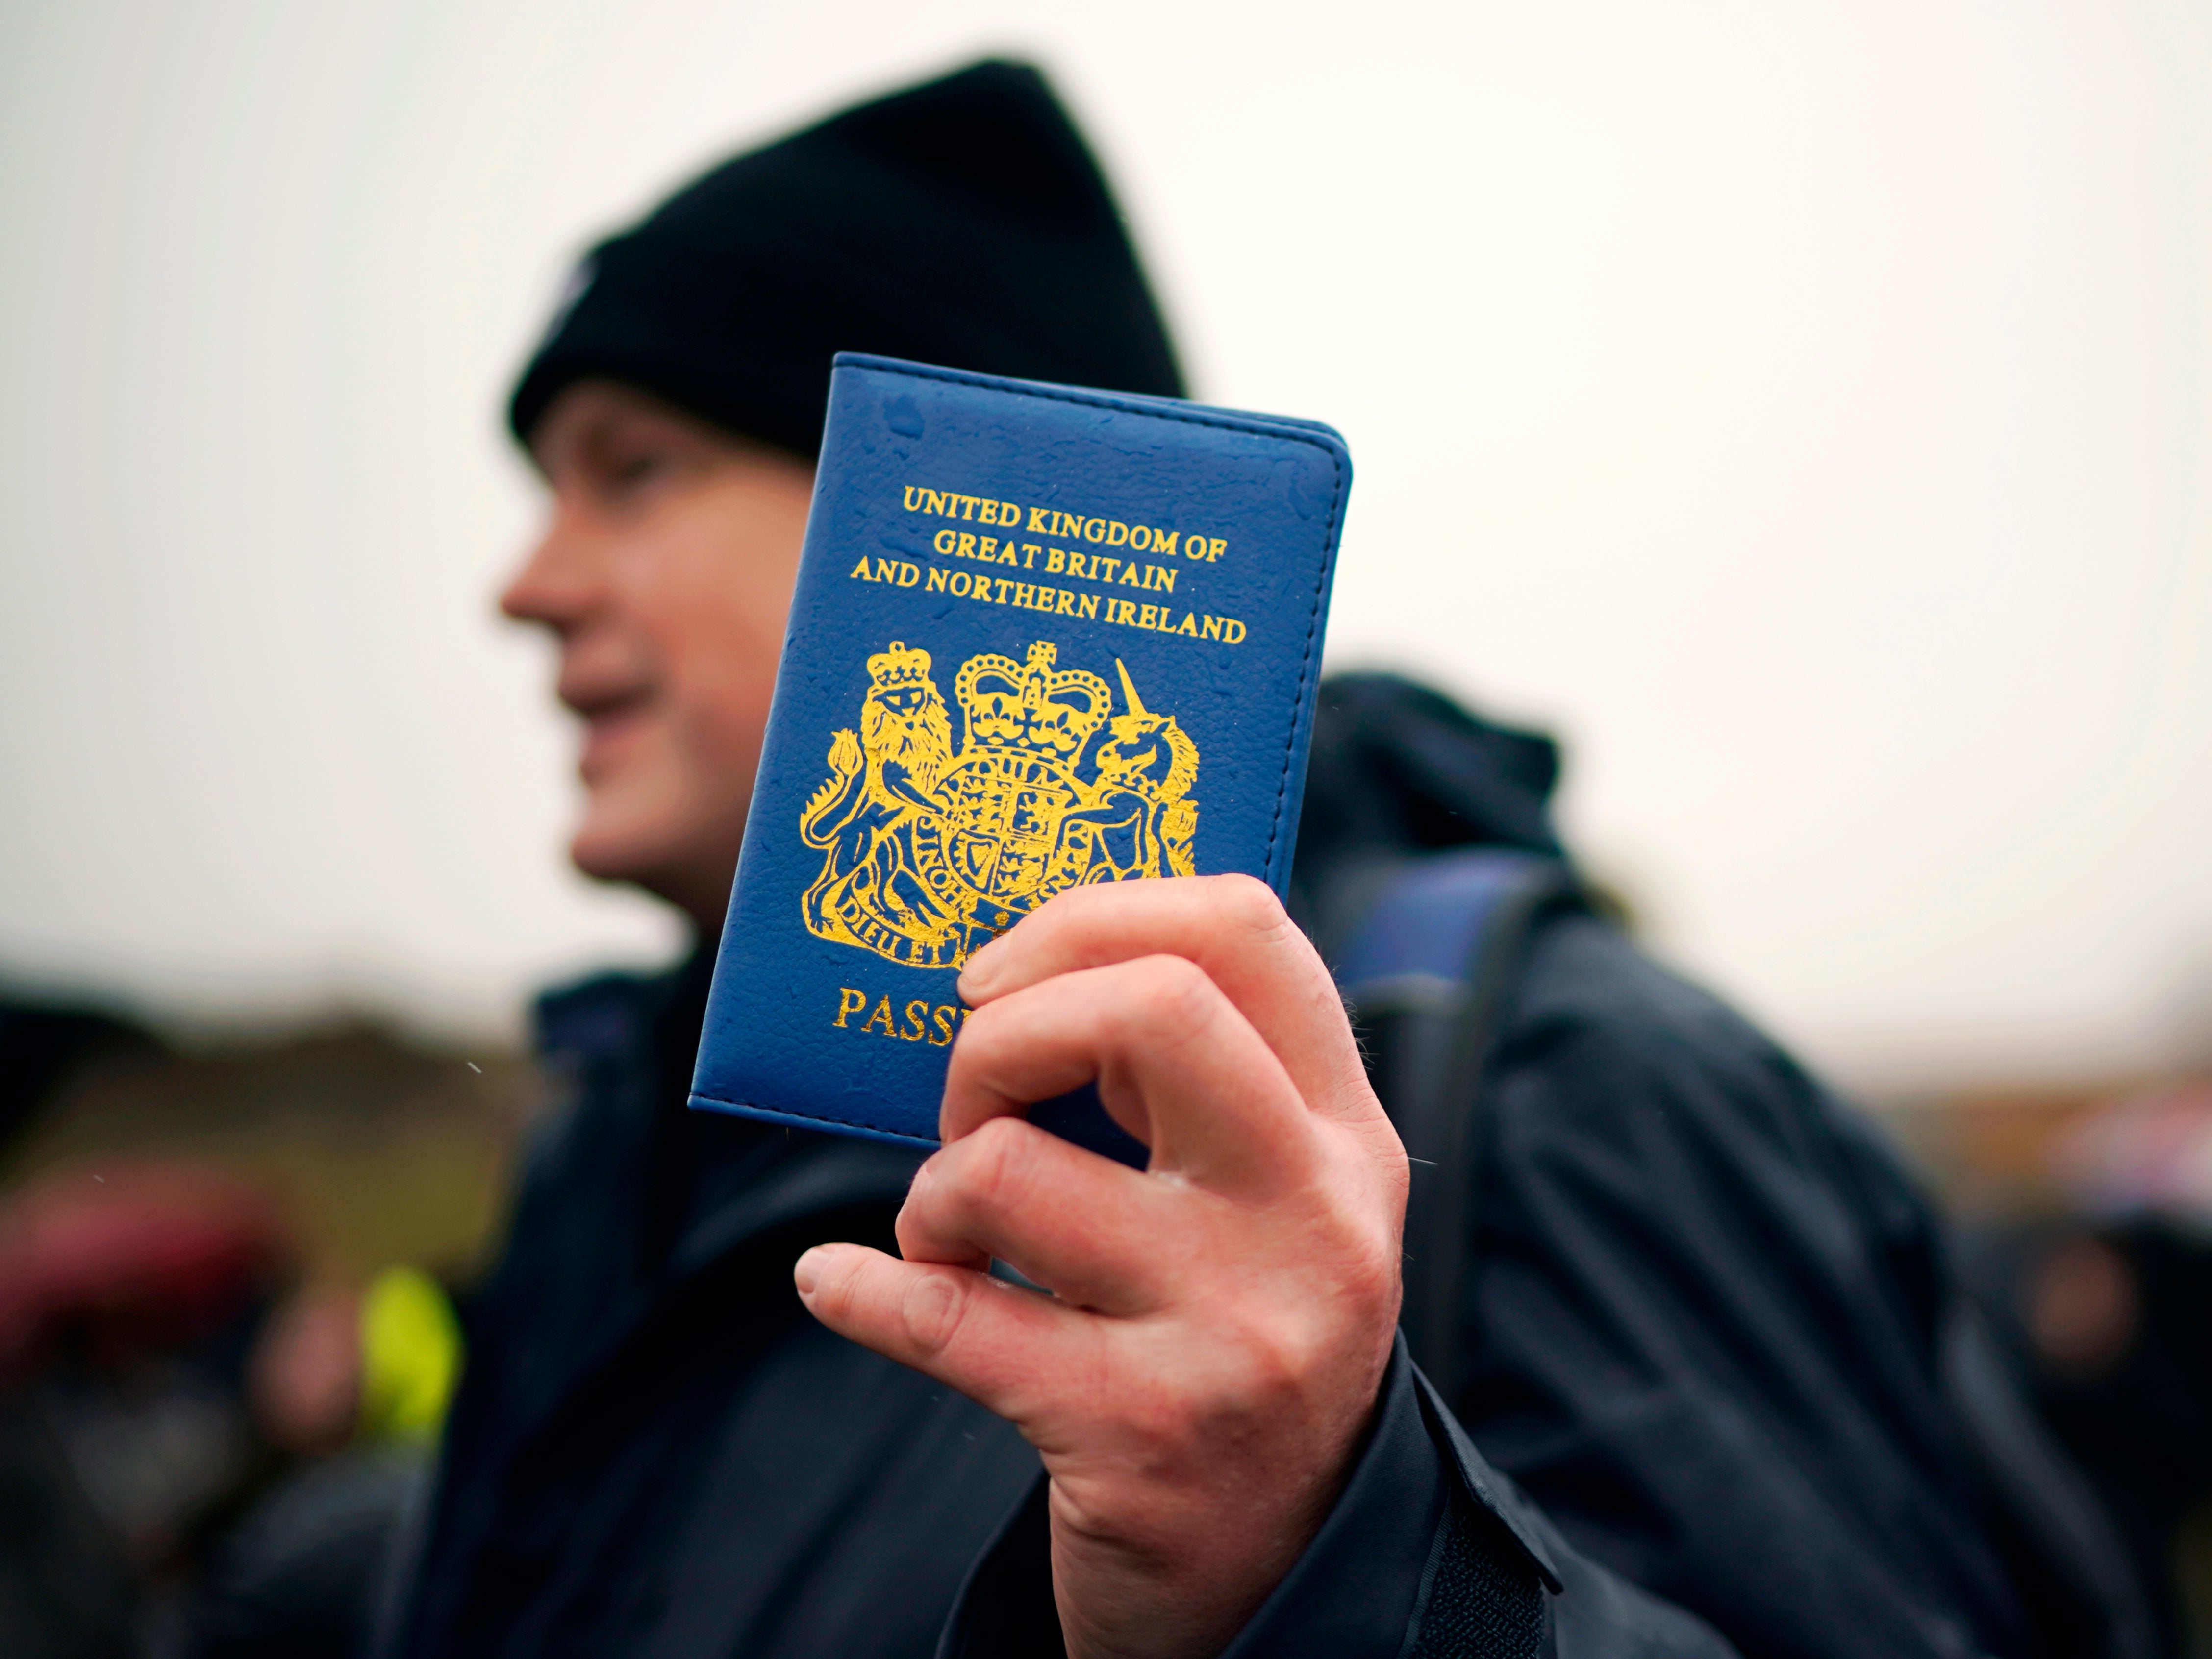 A Vote Leave supporter holds up a blue UK passport on the ‘March to Leave’ walk